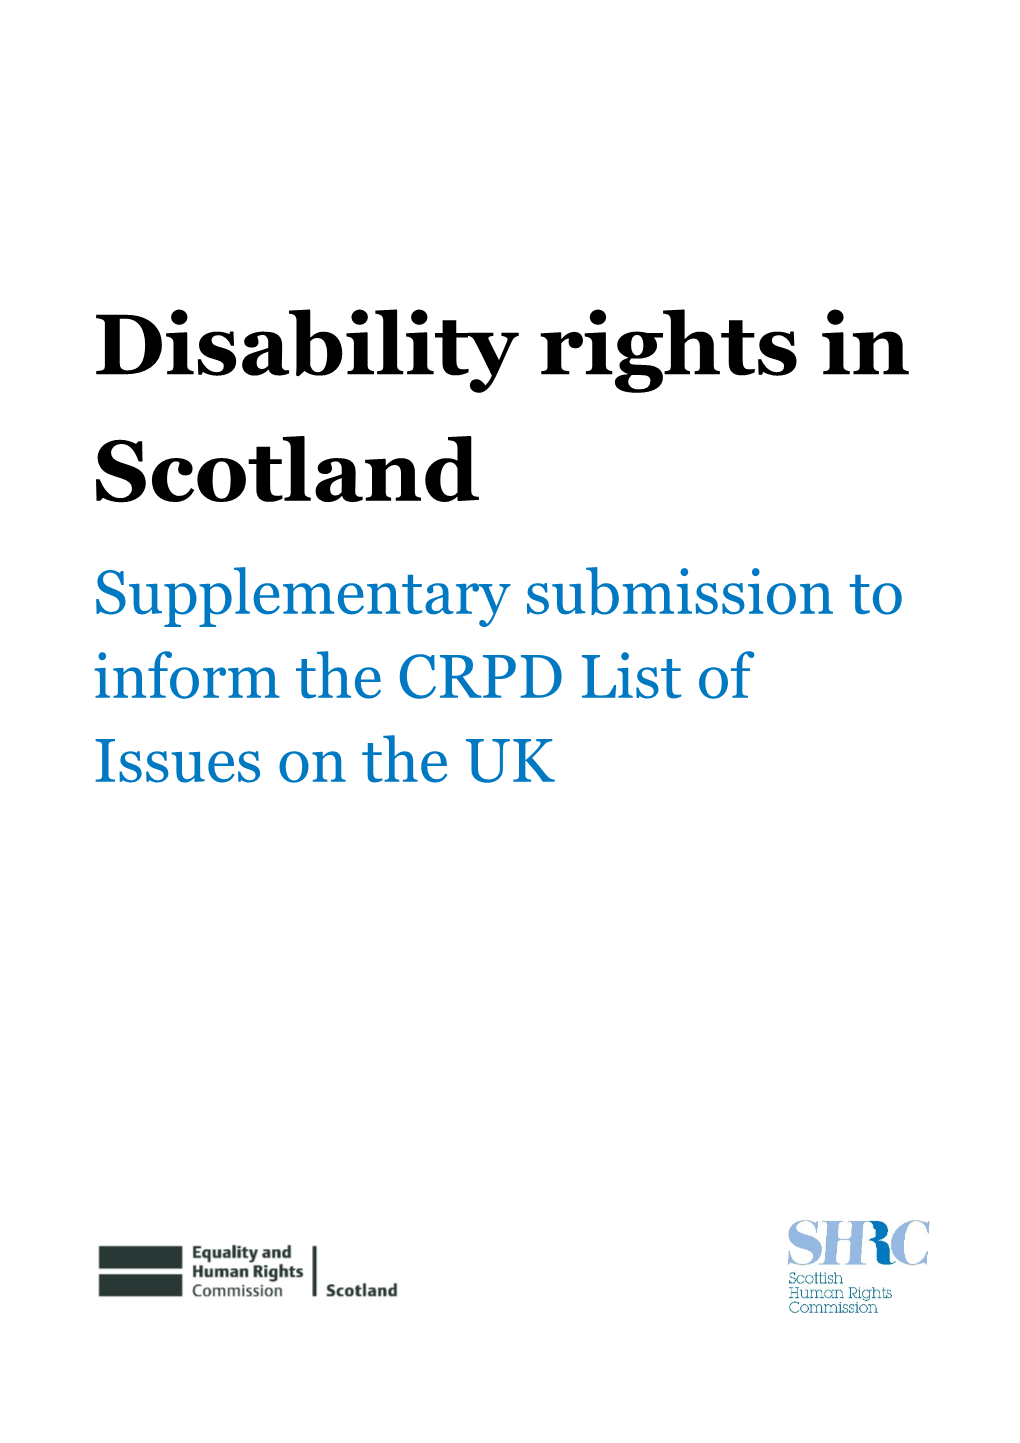 Disability Rights in Scotland: Supplementary Submission to Inform the CRPD List of Issues